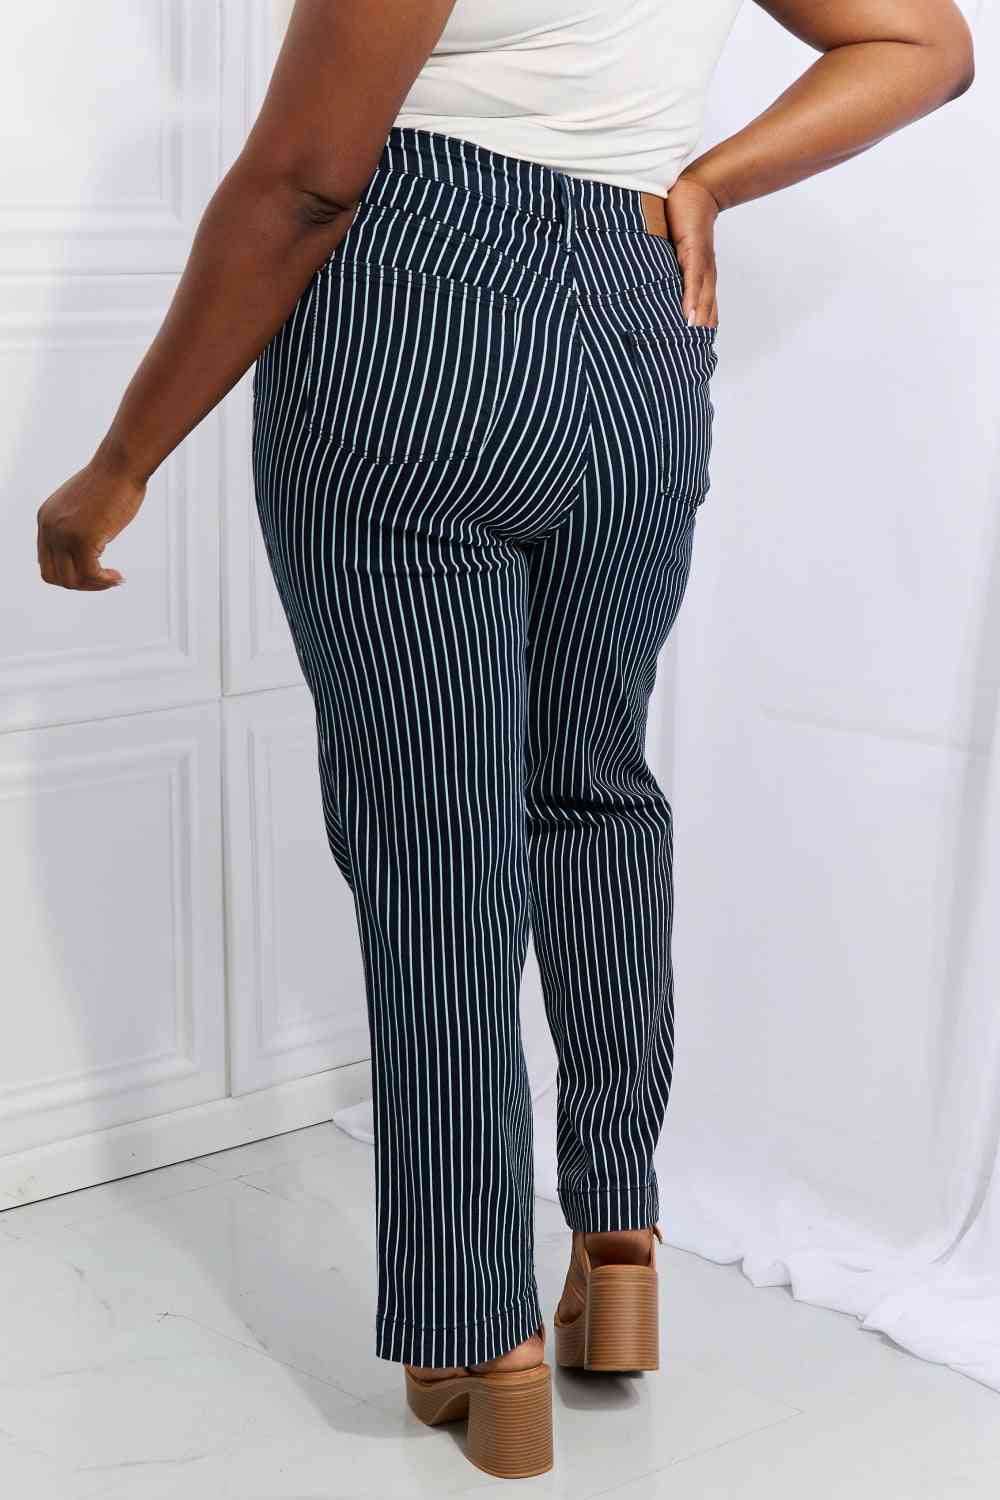 Judy Blue Cassidy Regular & Plus Size High Waisted Tummy Control Striped Straight Jeans